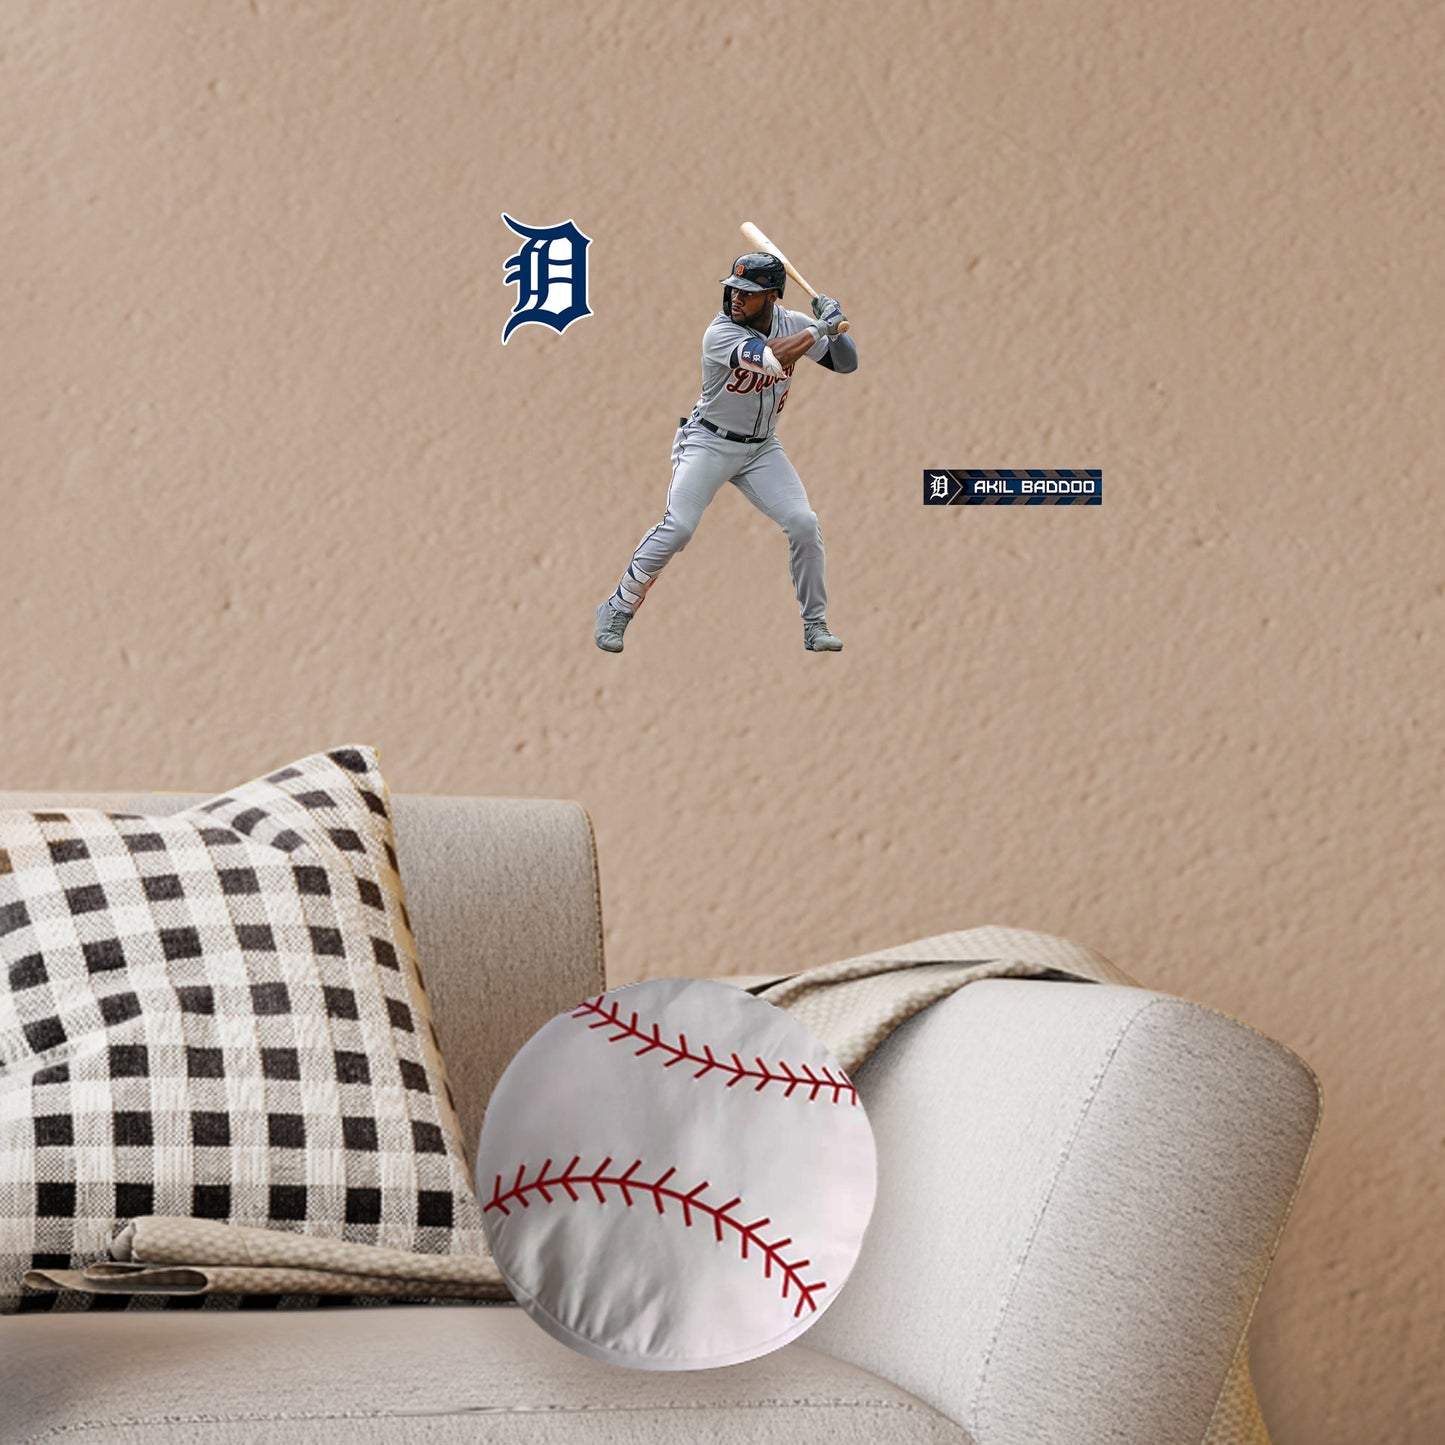 Detroit Tigers: Akil Baddoo - Officially Licensed MLB Removable Adhesive Decal